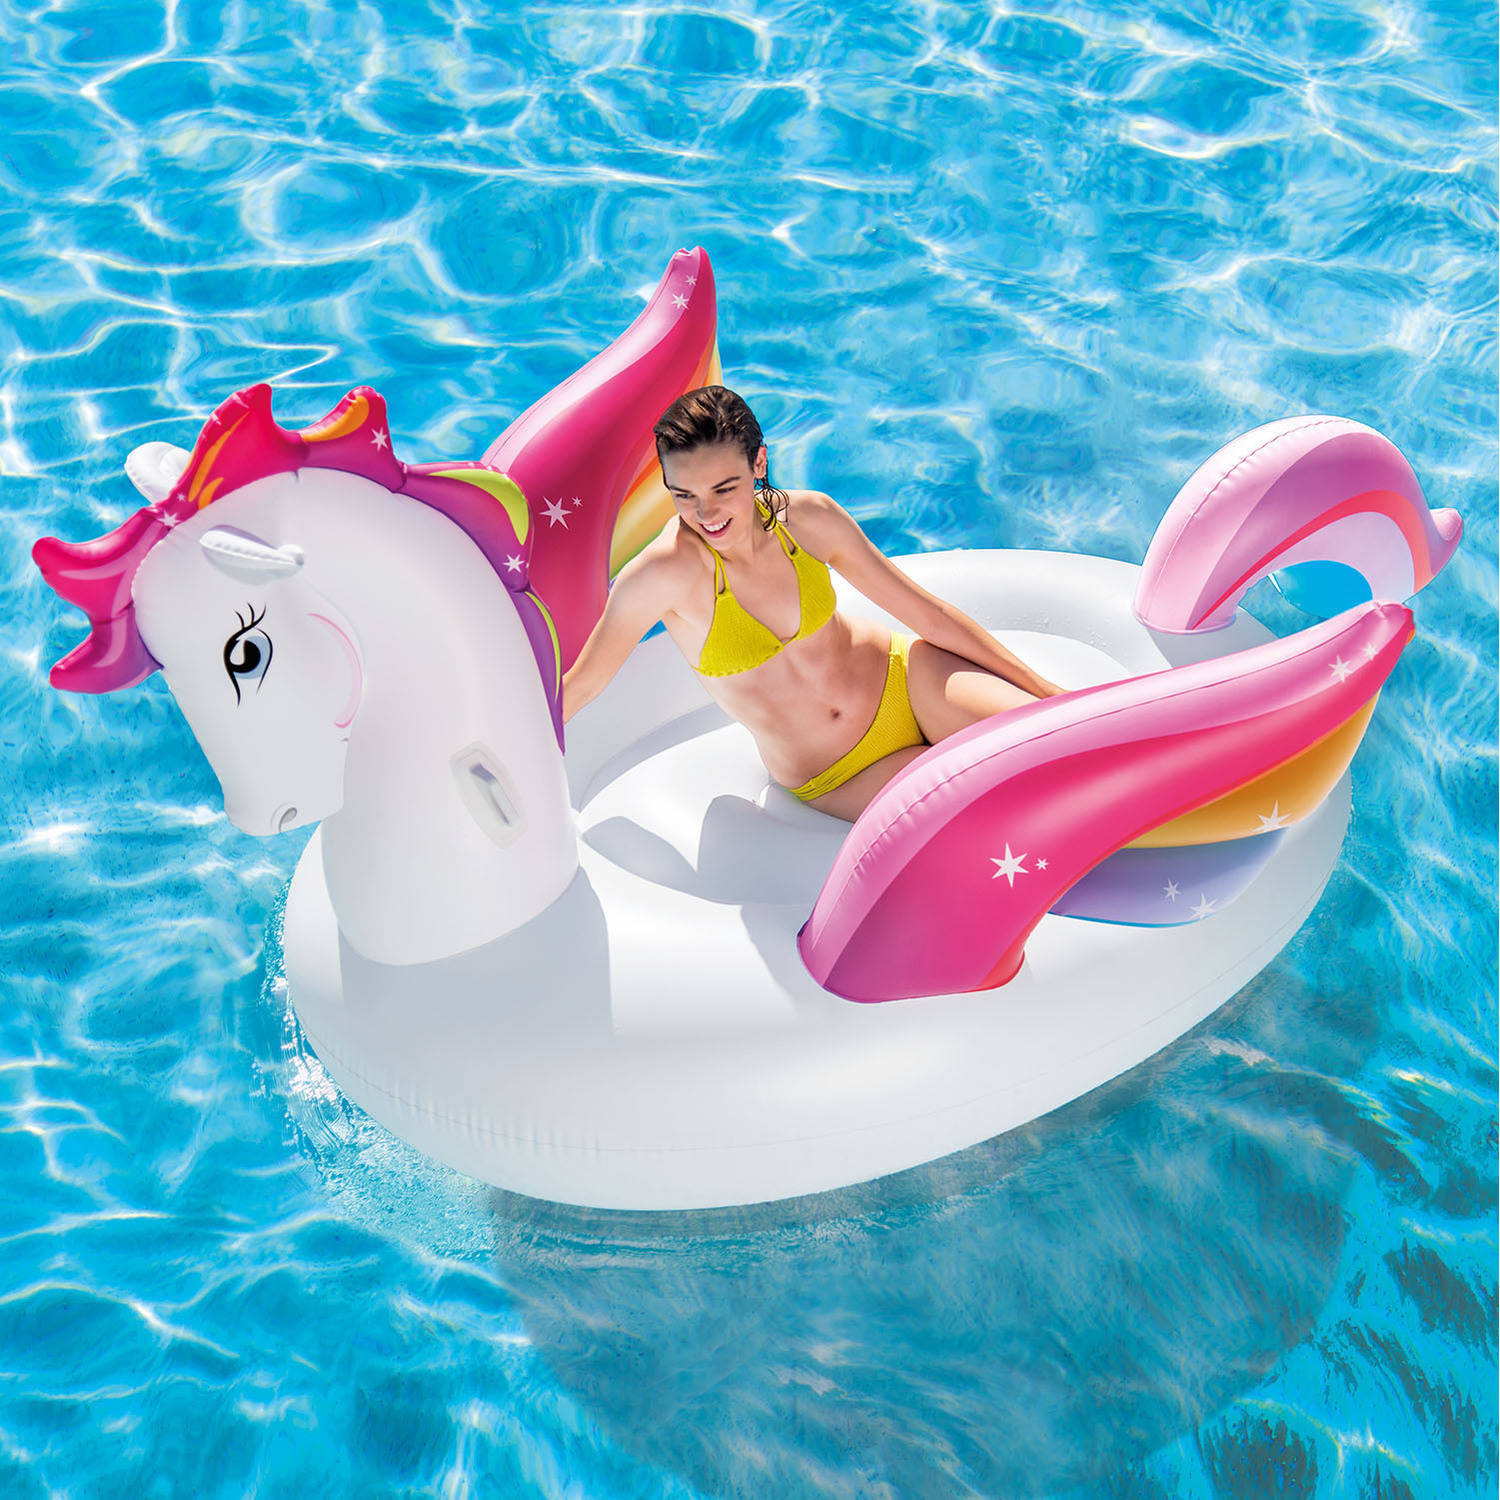 Inflables para piscina o playa – Pool or Beach Inflatables